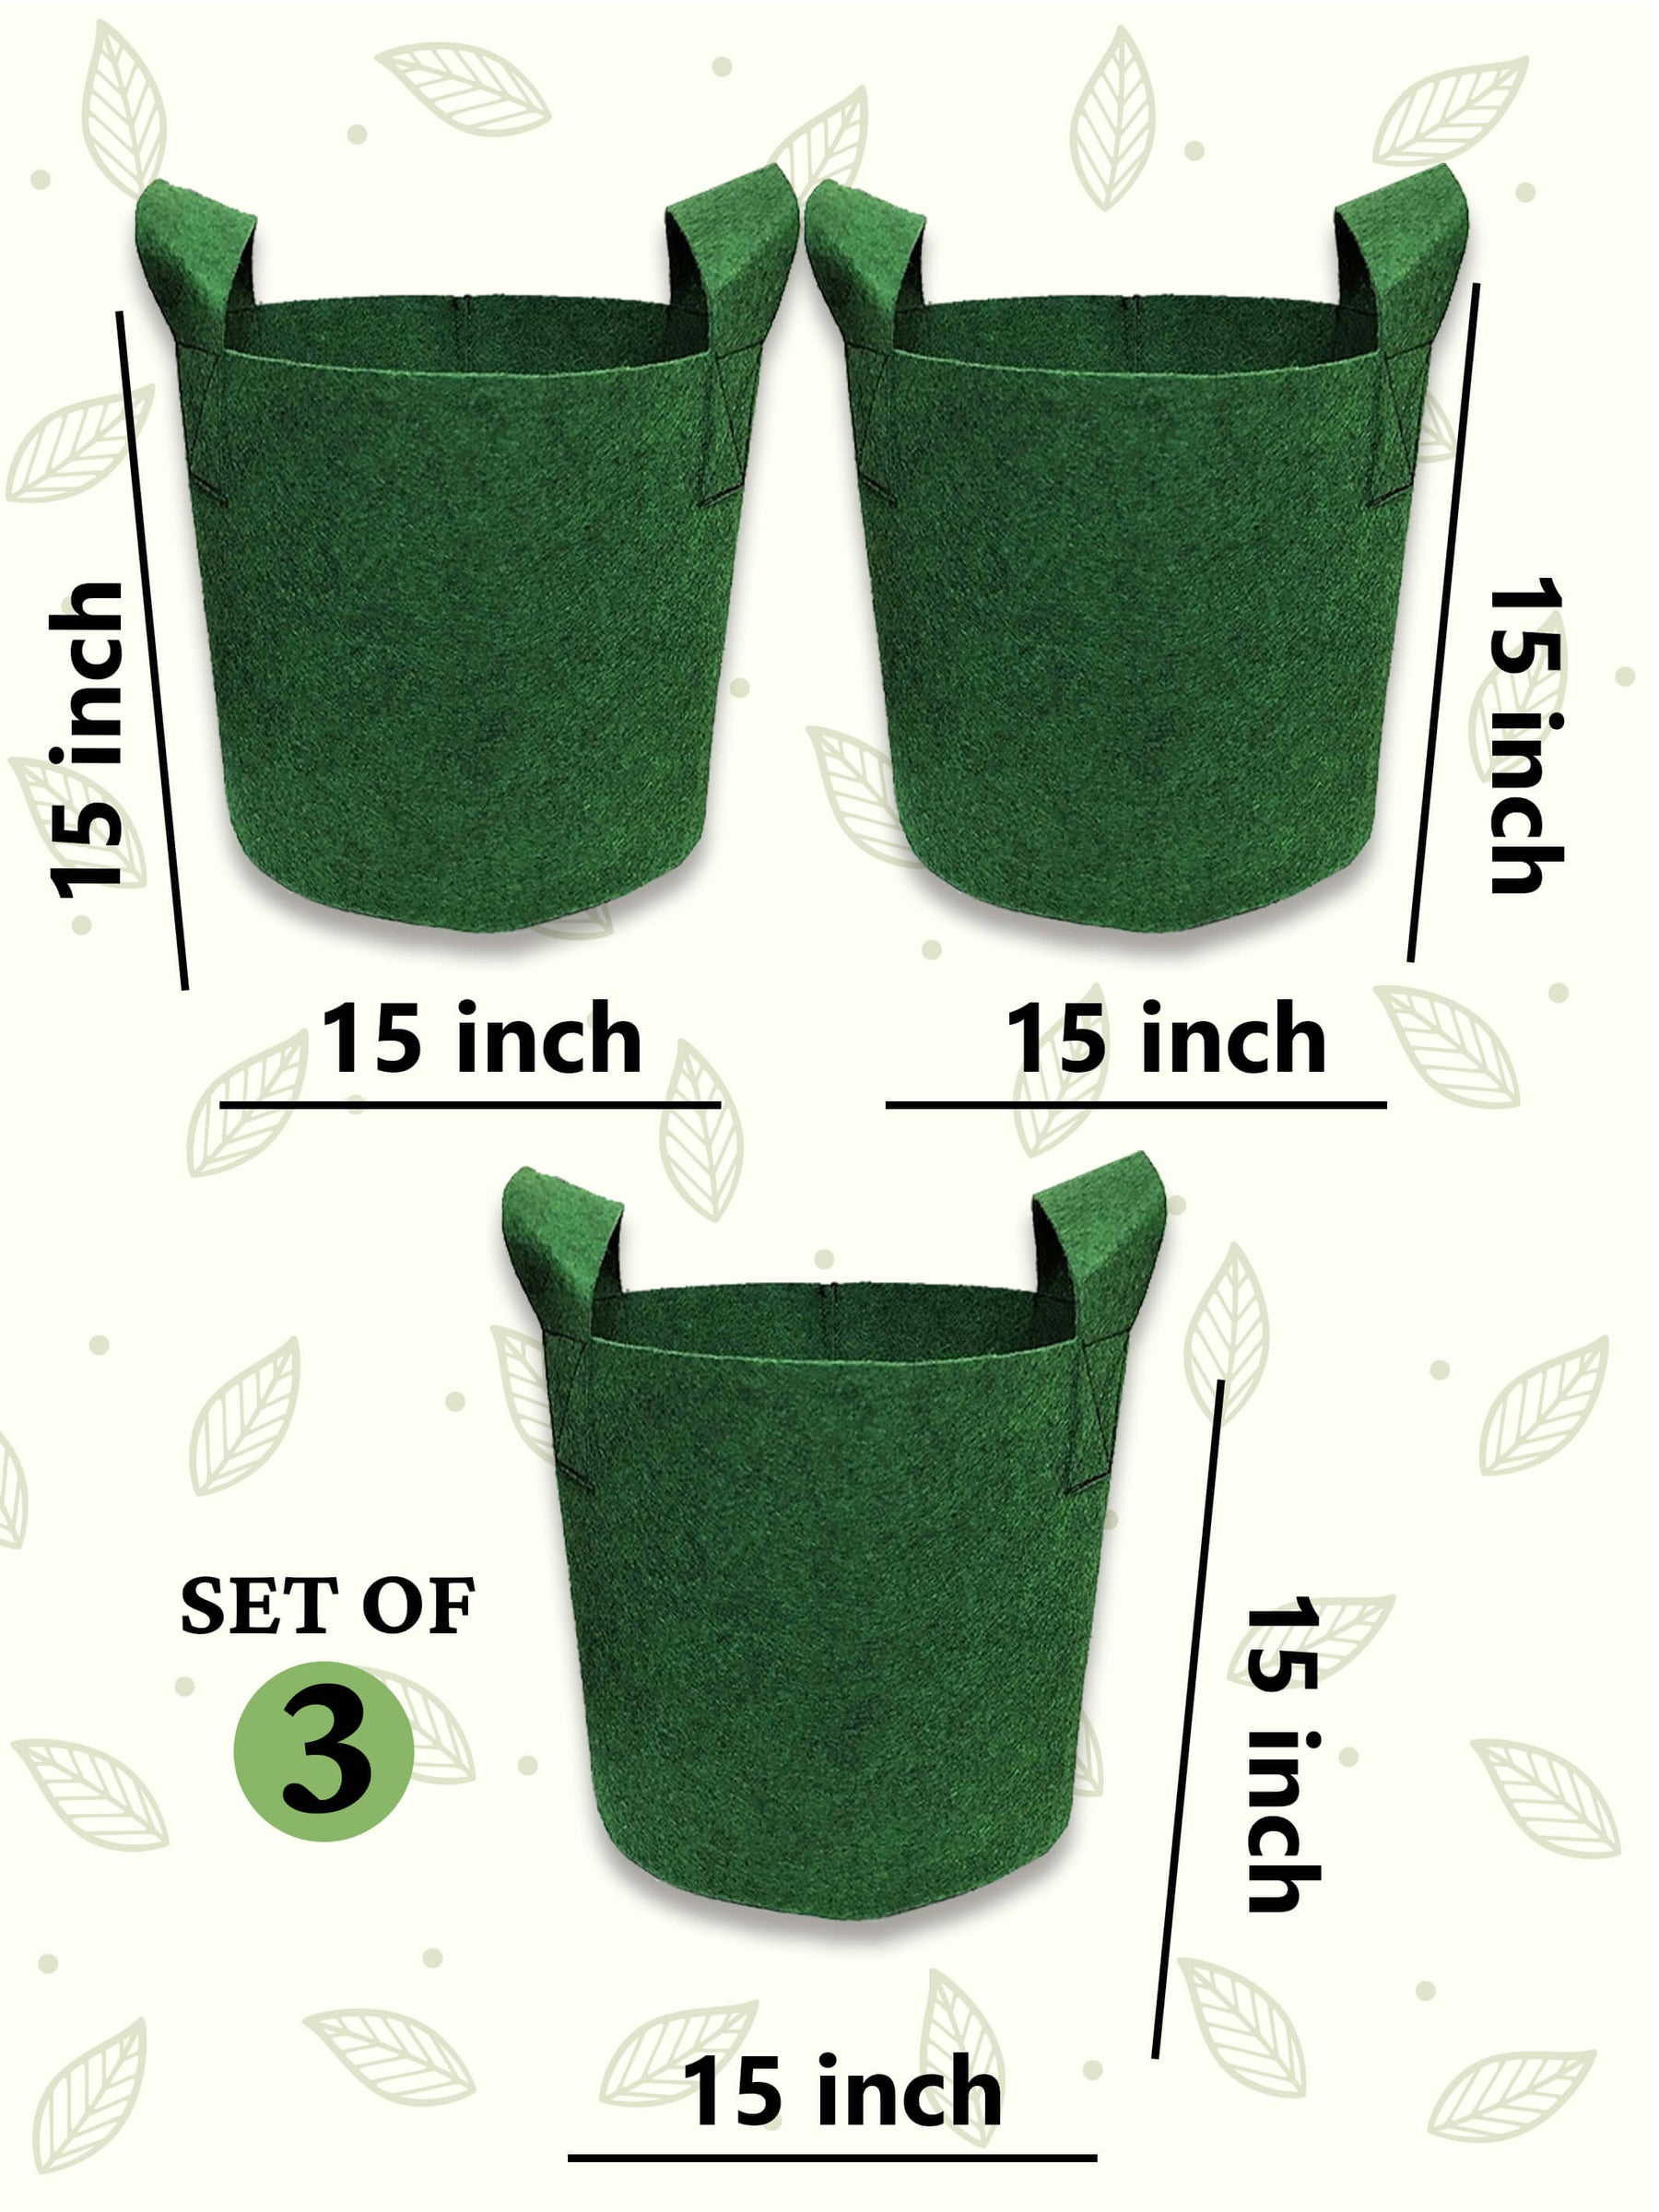 Geo Fabric Grow Bags 400 GSM - (Set of 3) - 15x15 inches